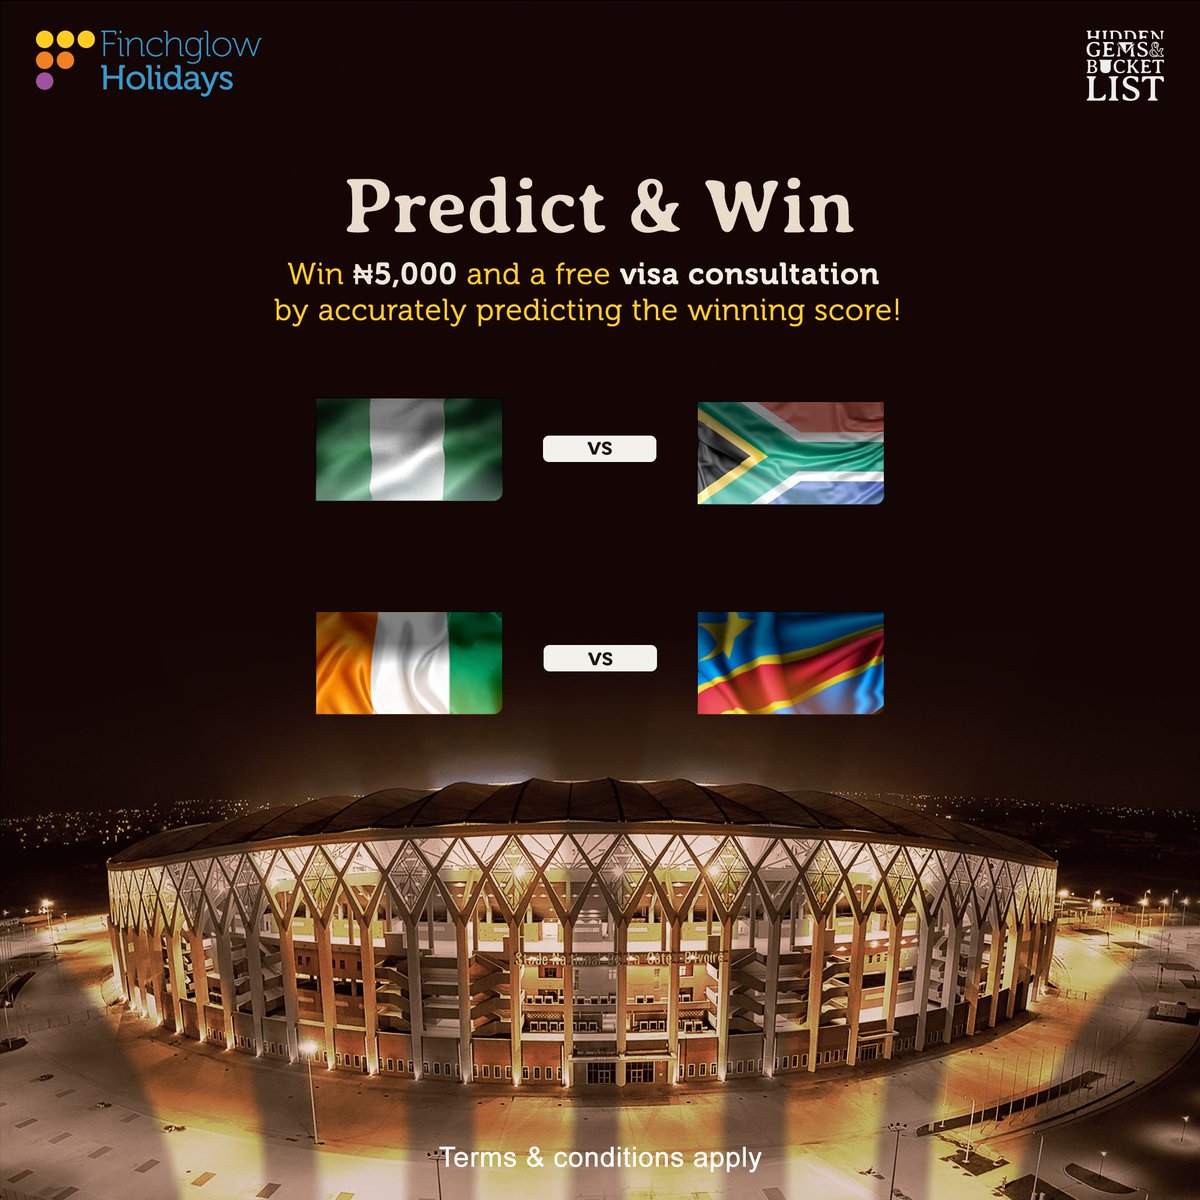 Game on! 🏆

It’s time for the AFCON semi-finals ⚽💃🏽

Guess the winning score and stand a chance to win 5,000 naira along with a complimentary visa consultation with our Predict and Win giveaway! 

Make your predictions now in the comments below.

#finchglowholidays #afcon2024